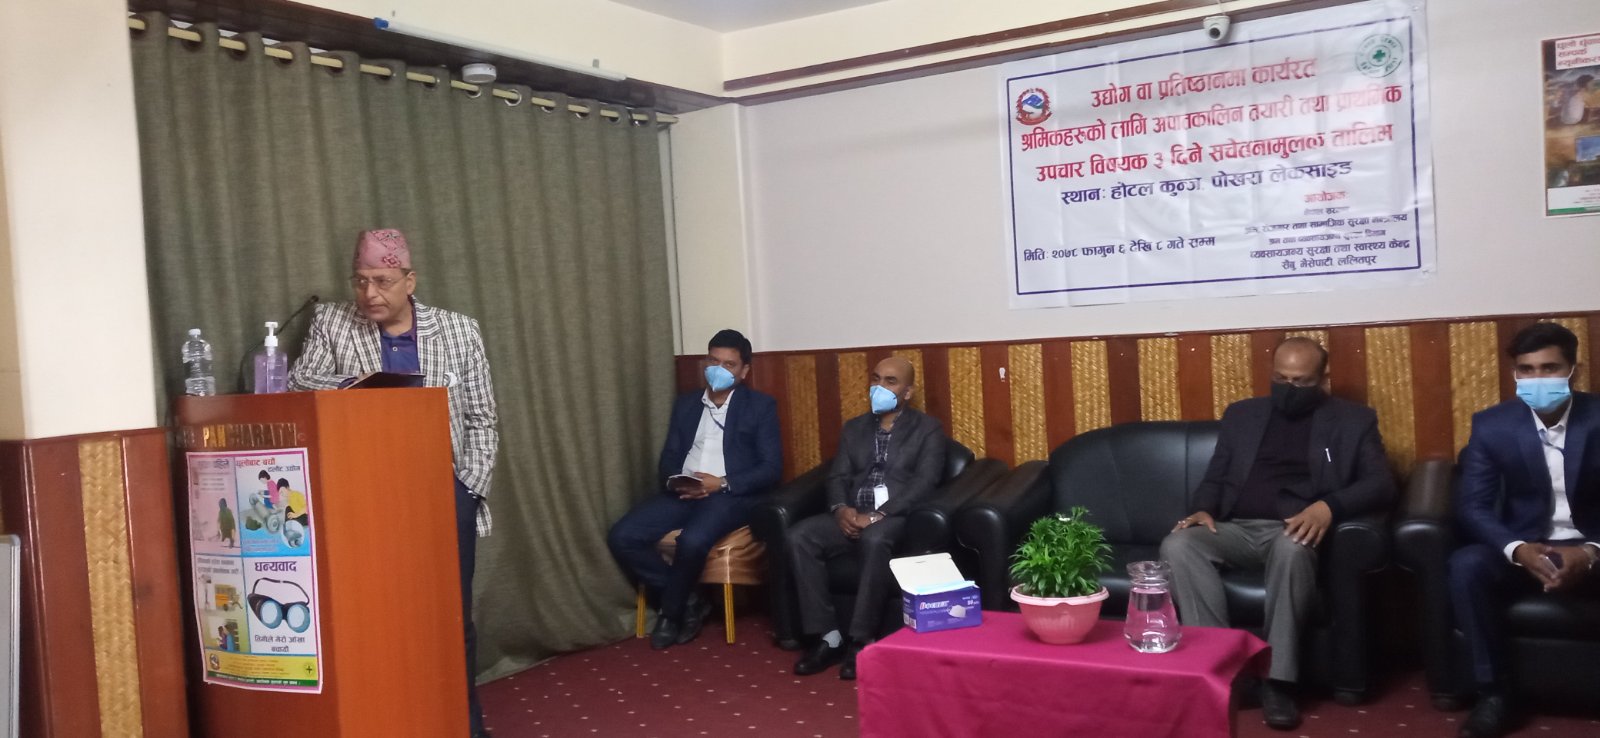 Opening Ceremony at Pokhara By Director General